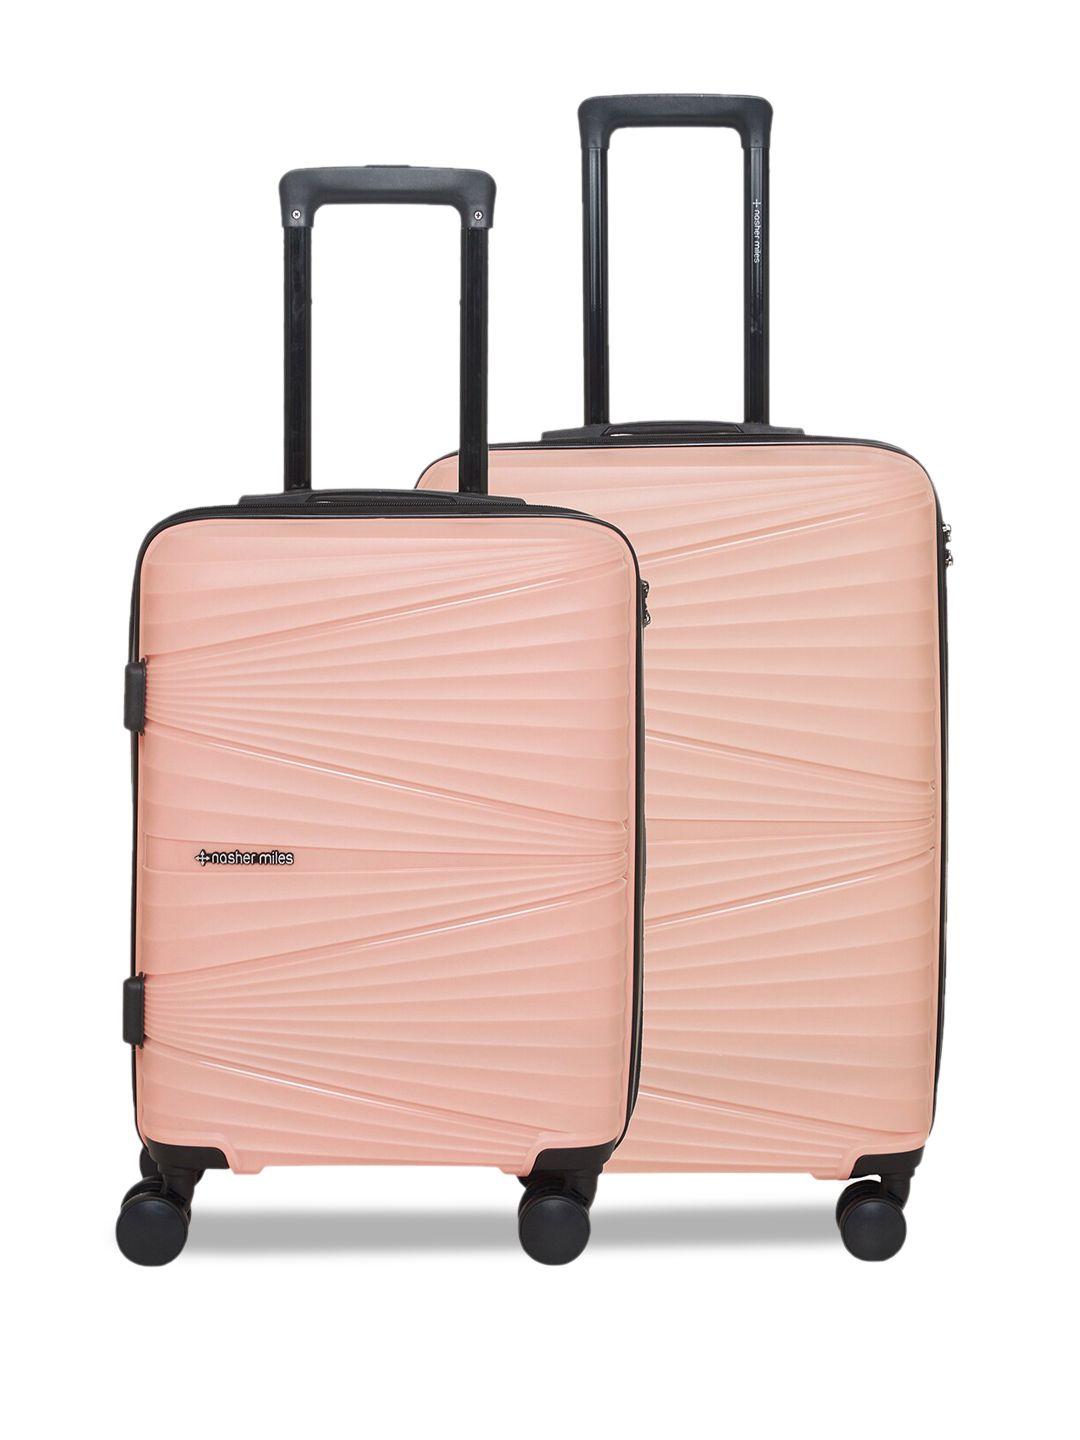 nasher miles set of 2 peach solid hard-sided trolley bags